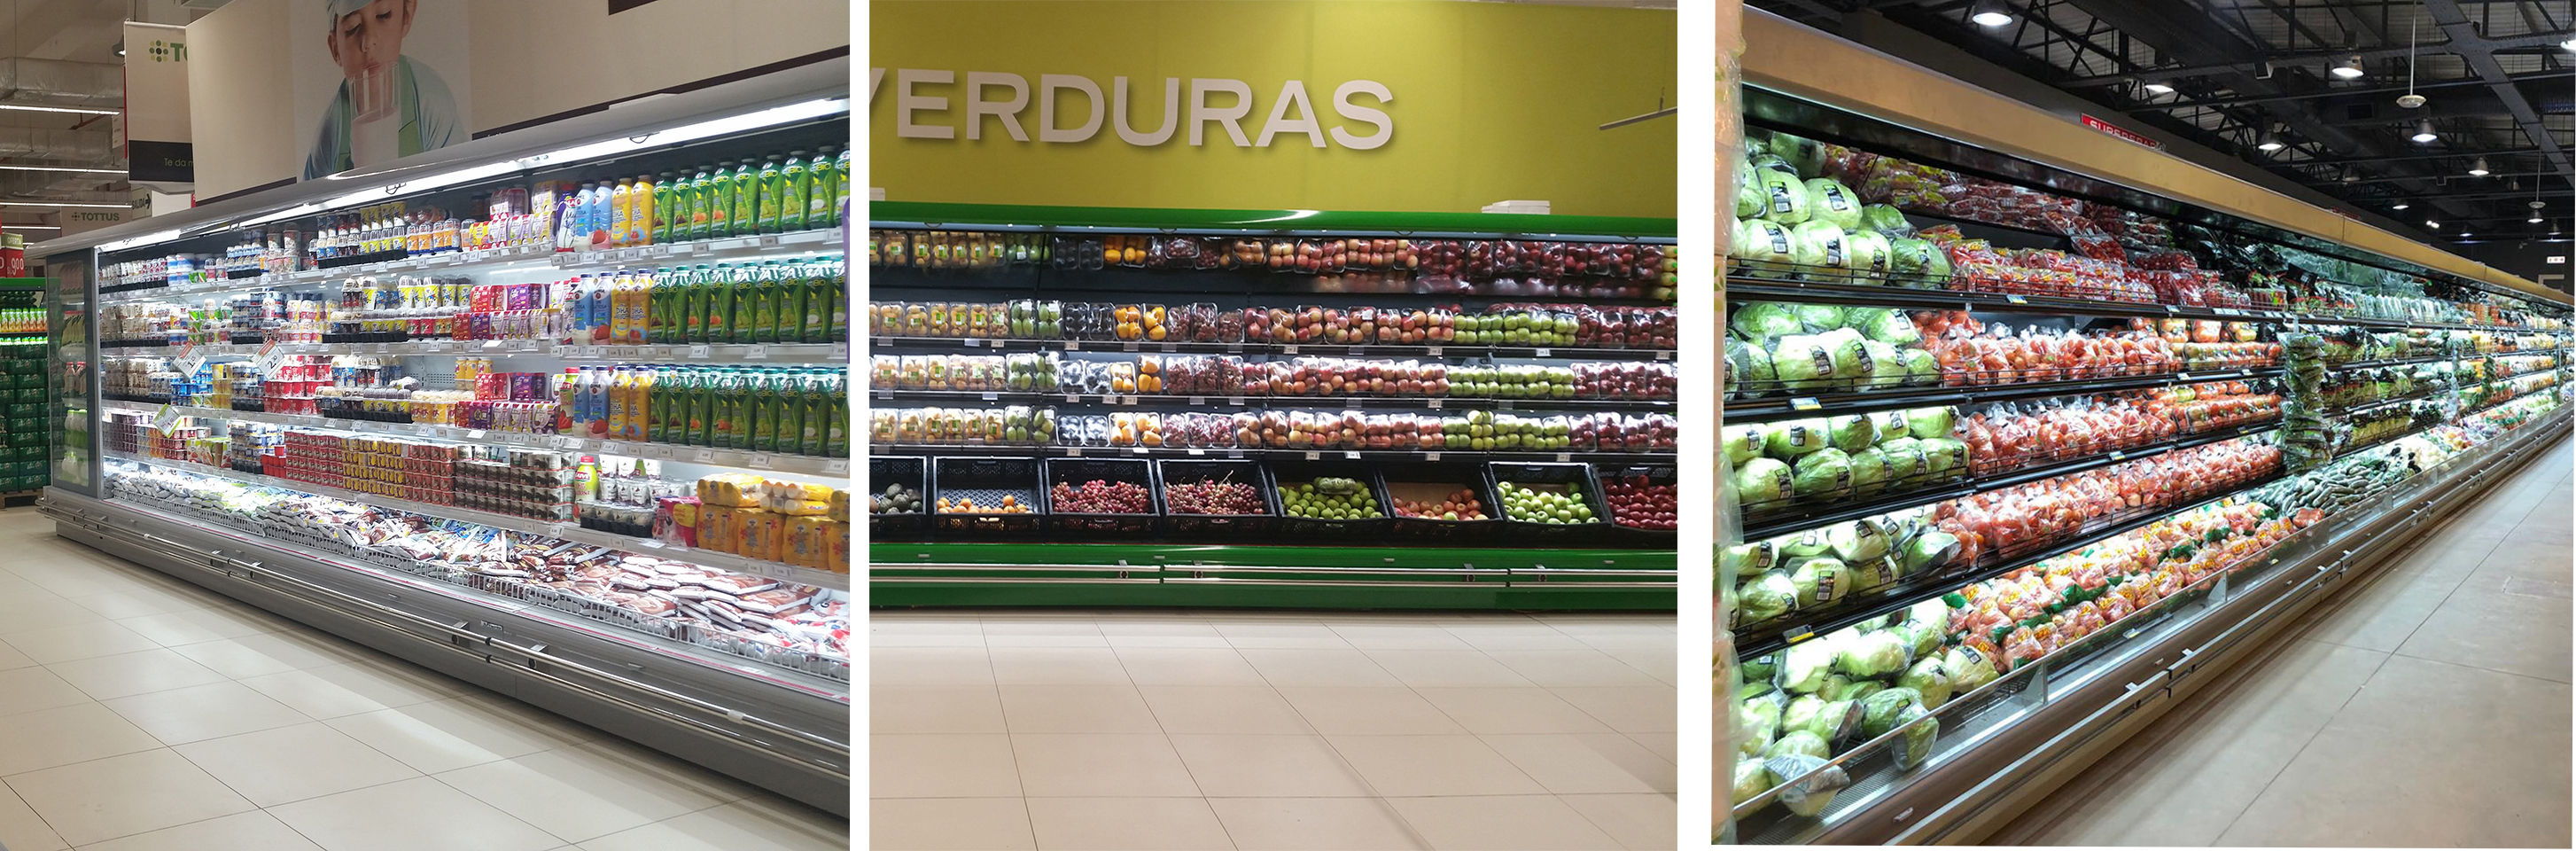 Wide Open Air Commercial Refrigerated Produce Display Case